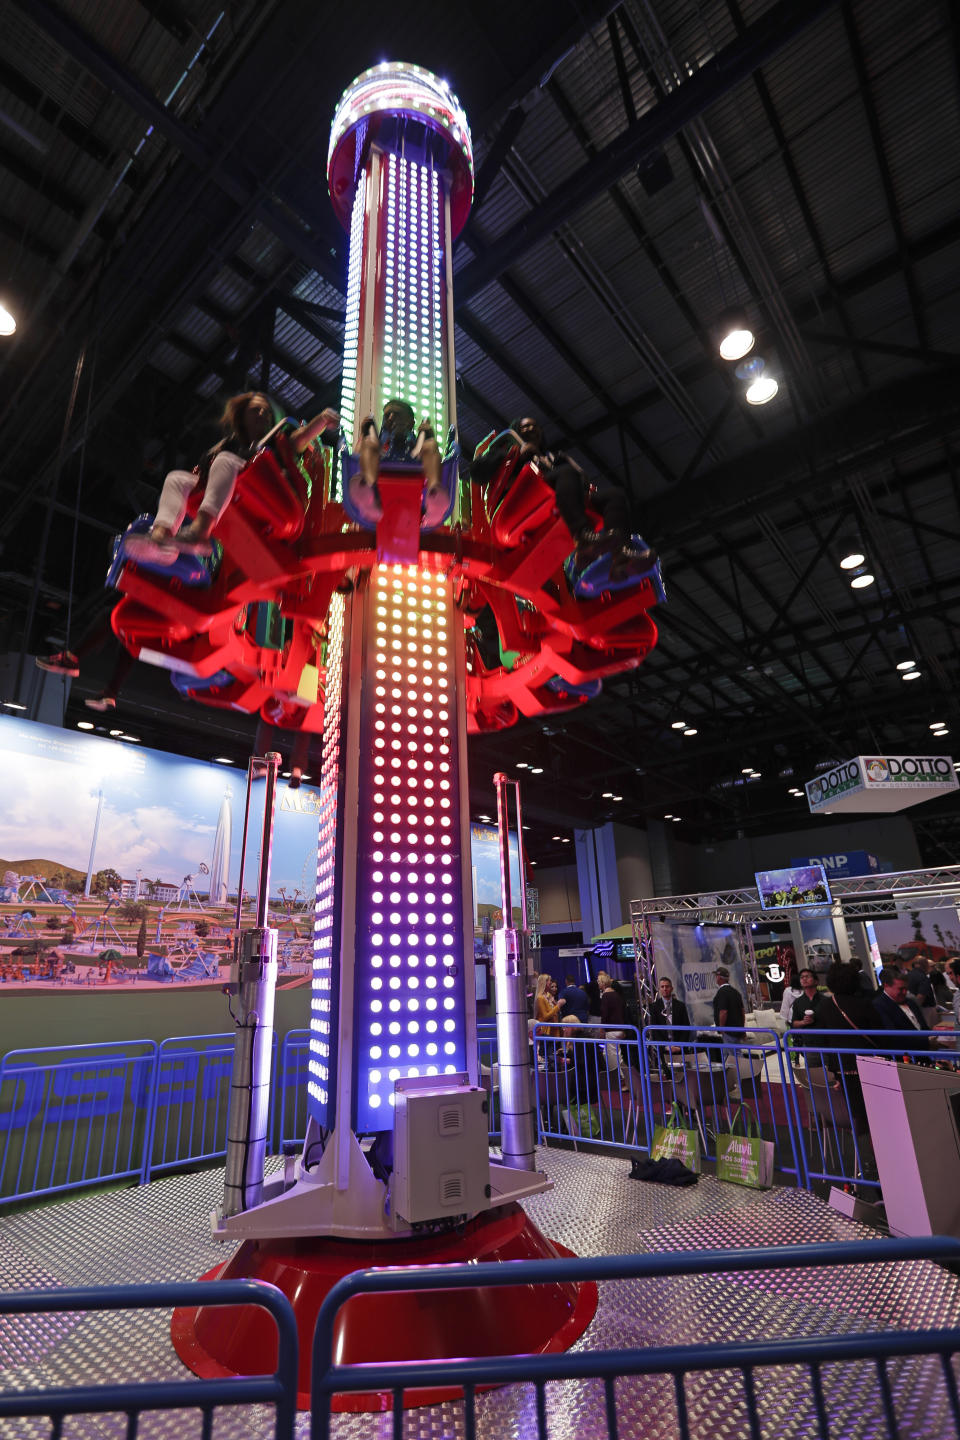 Attendees sample one of the many rides on display at the International Association of Amusement Parks and Attractions convention Tuesday, Nov. 19, 2019, in Orlando, Fla. (AP Photo/John Raoux)